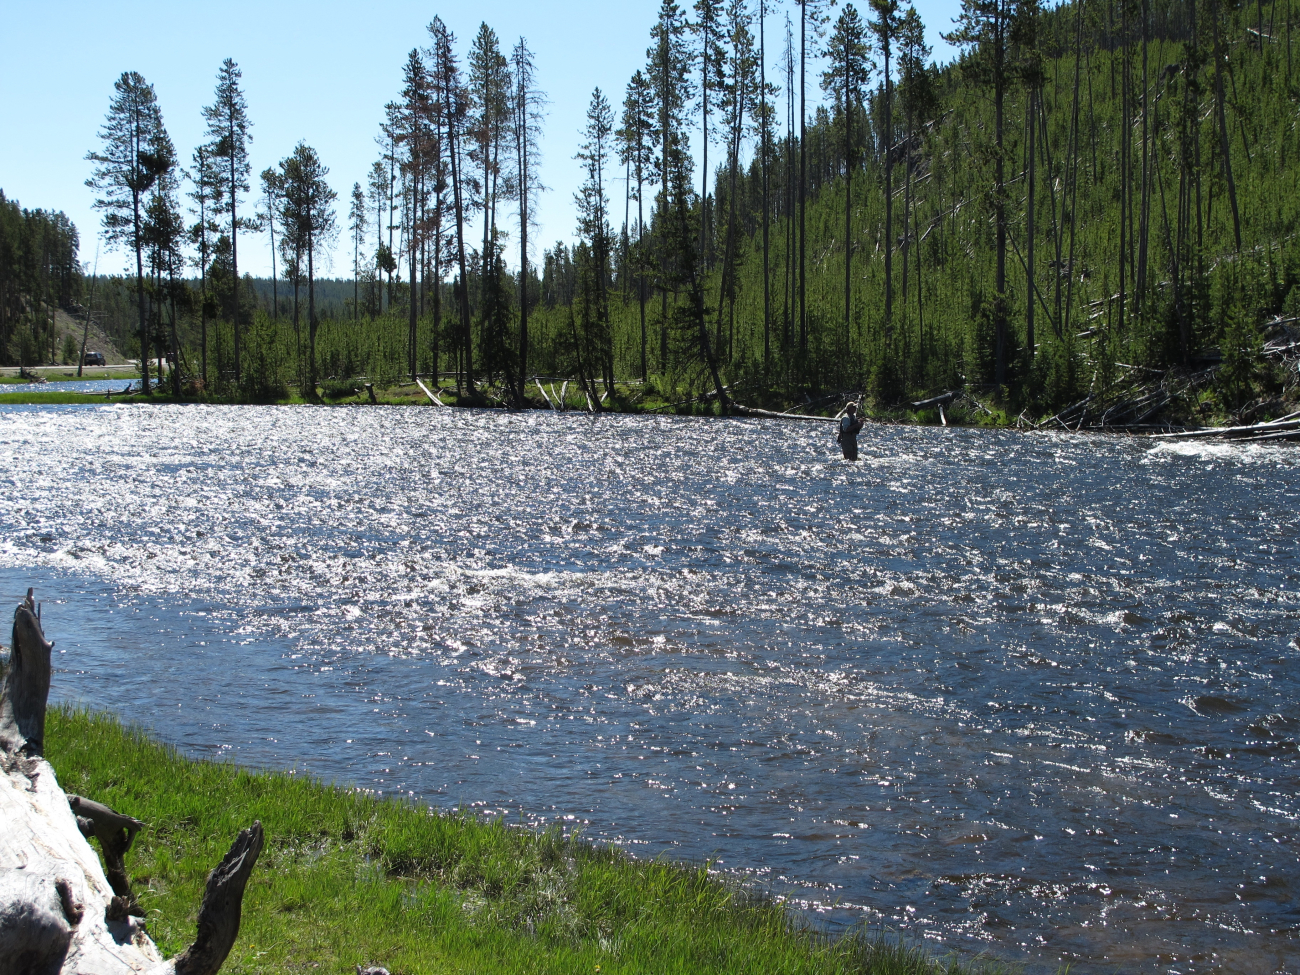 A fly fisherman enjoys a glorious summer day on the Firehole River